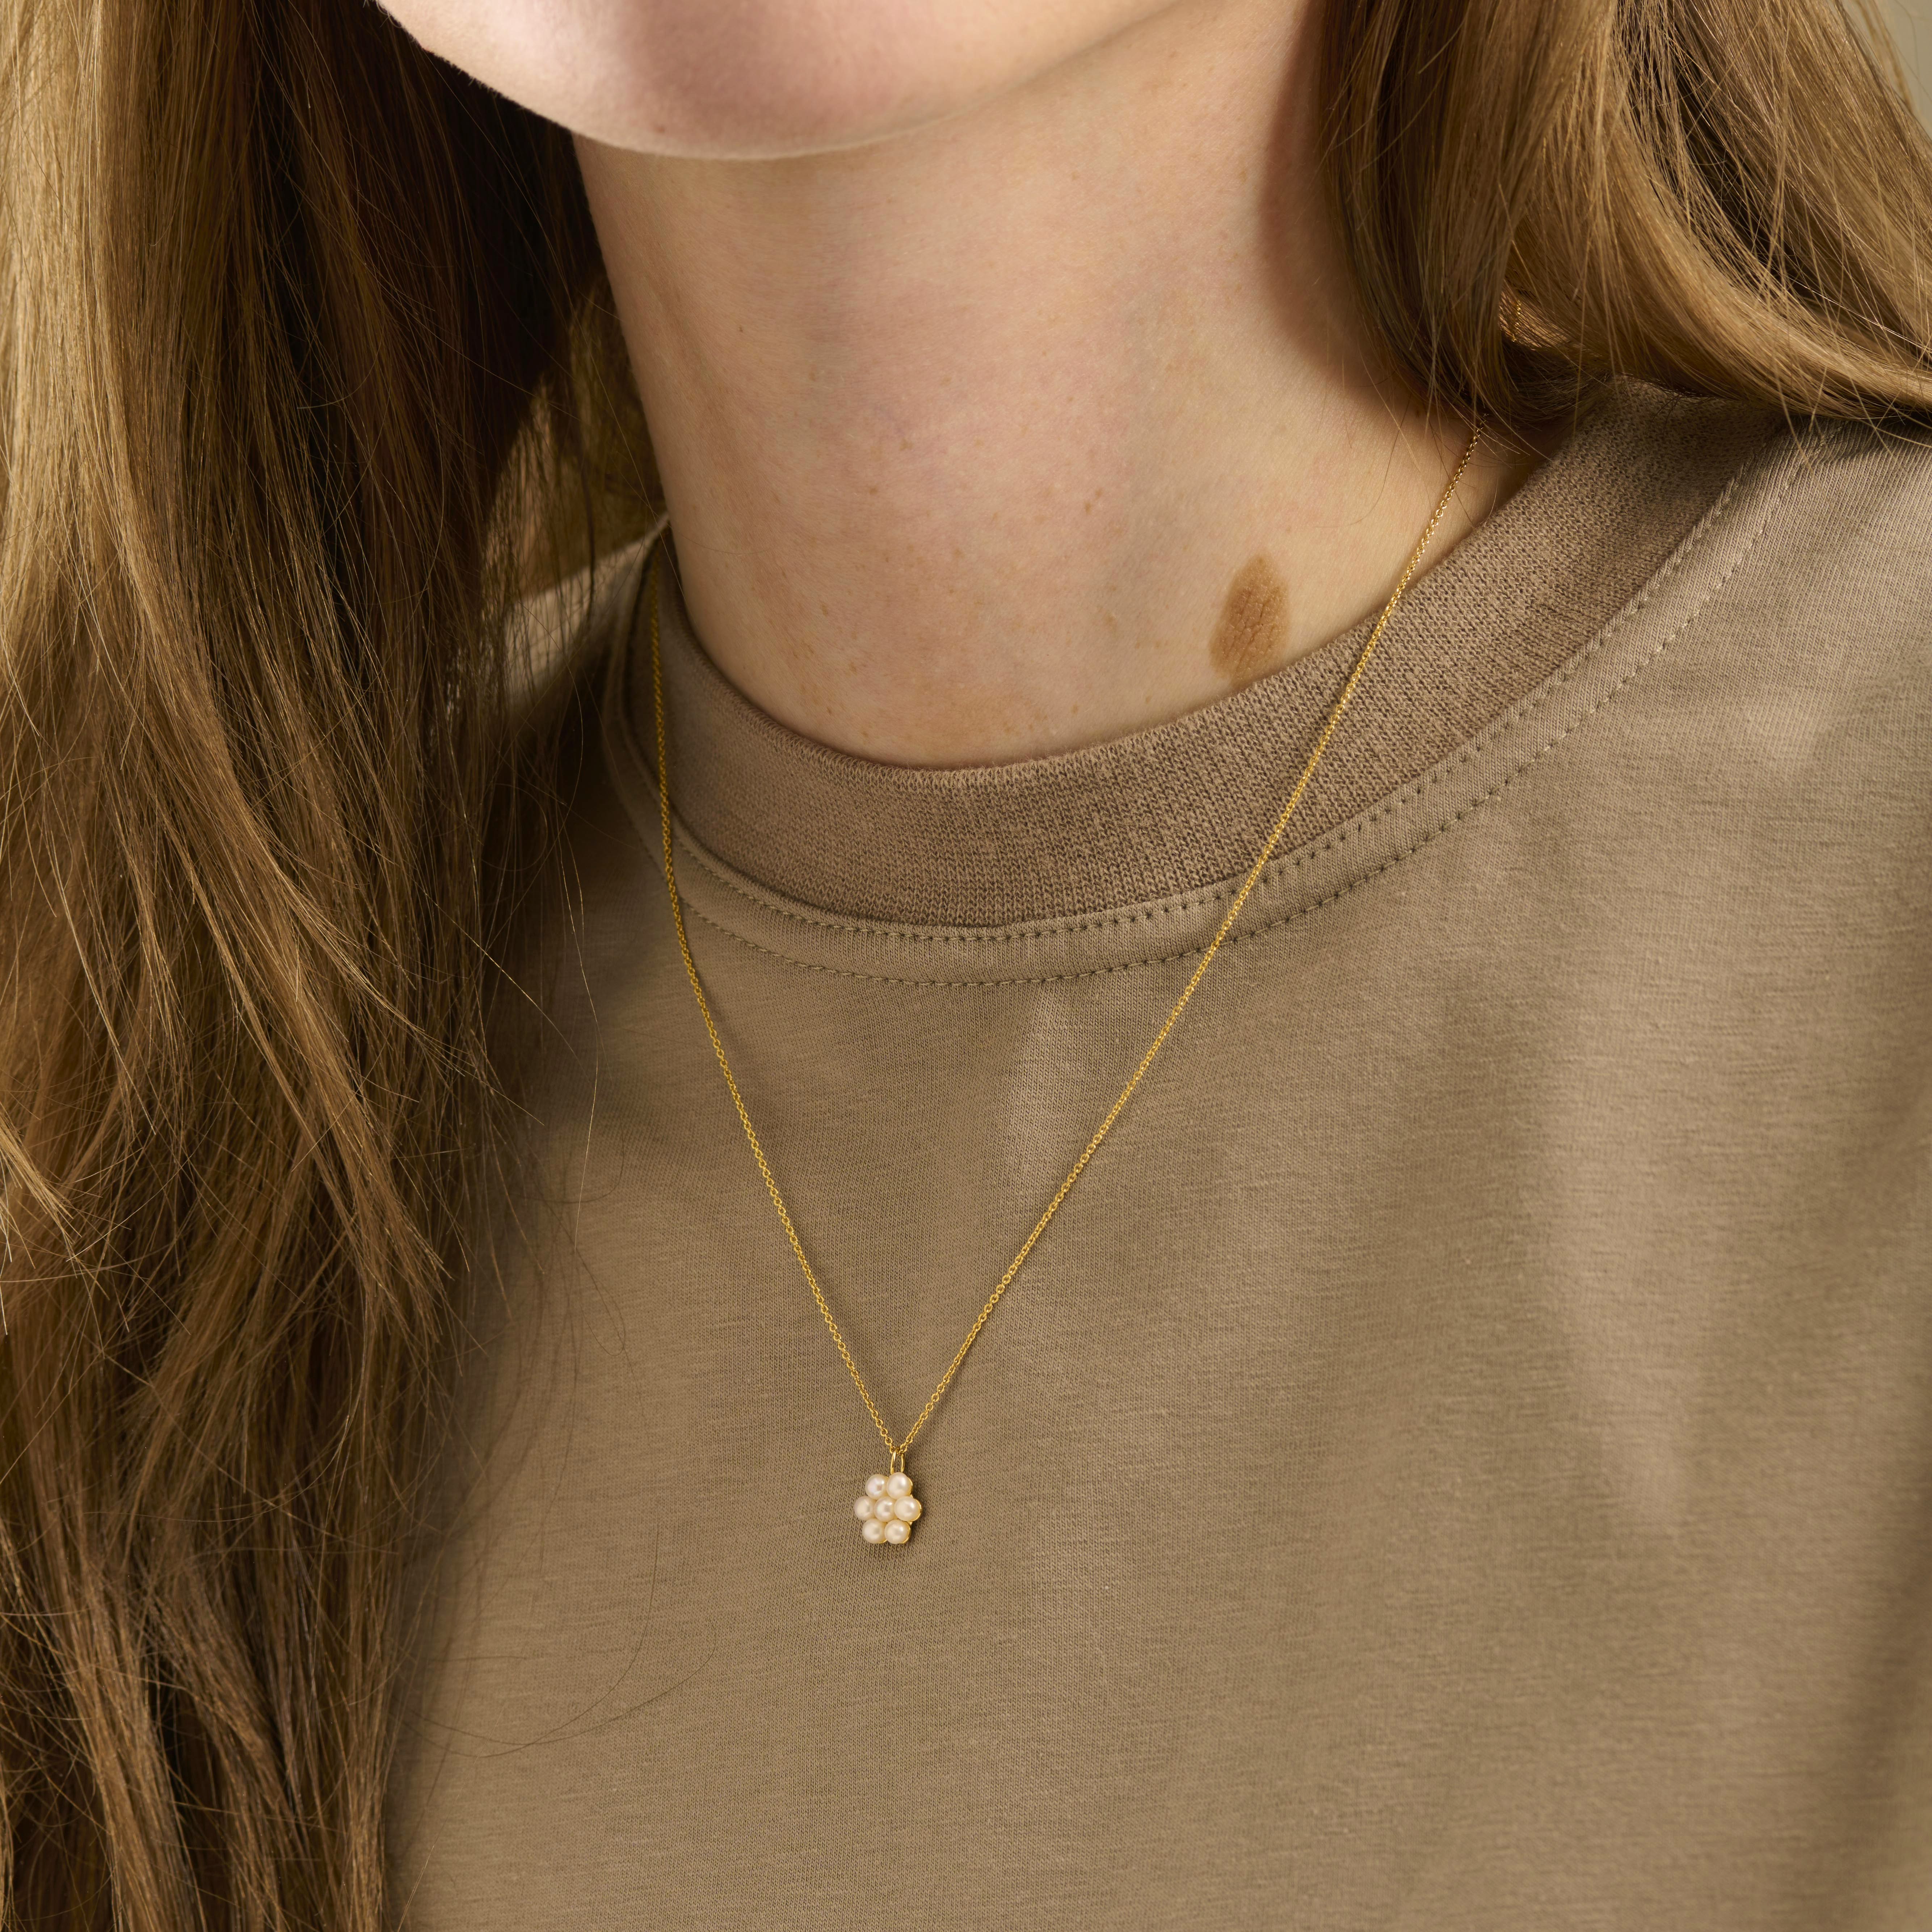 Ocean Bloom Necklace from Pernille Corydon in Goldplated Silver Sterling 925